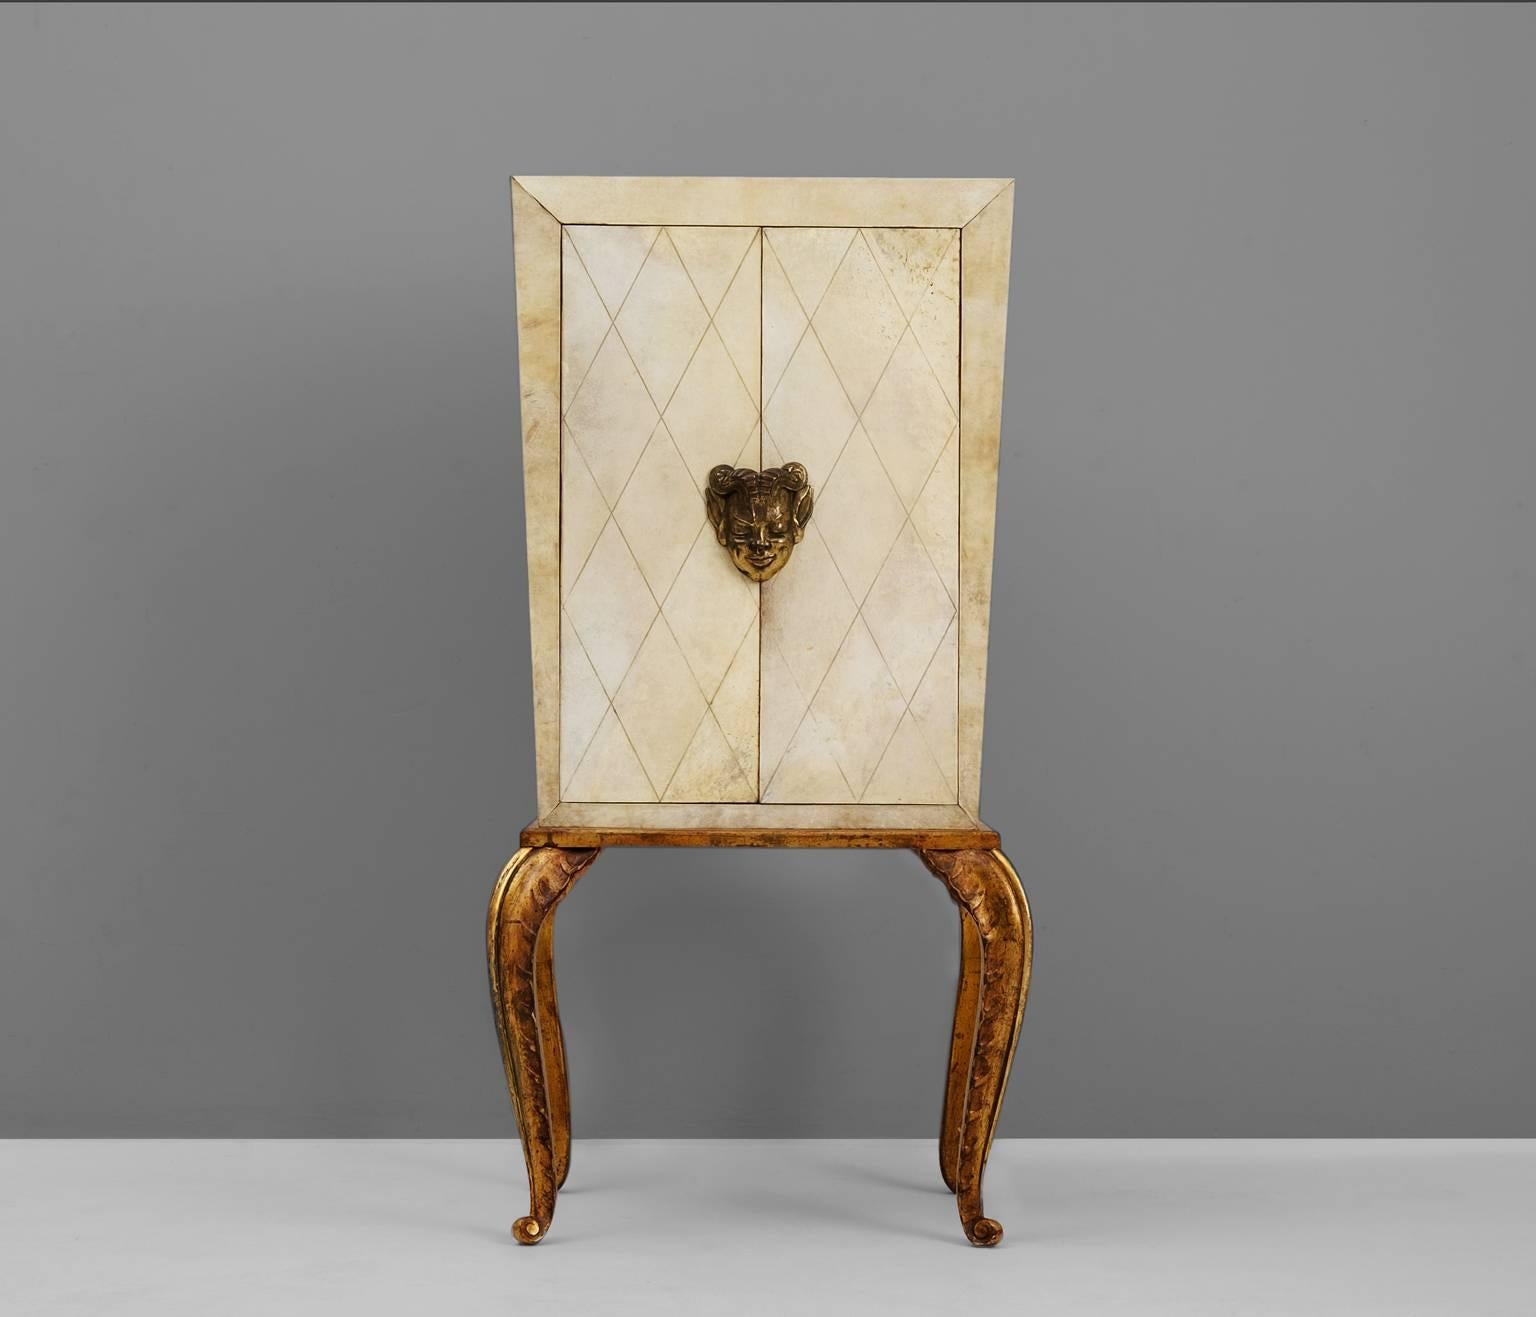 Cabinet, in parchment and wood, by Maison Jansen, France, 1940s. 

A rare and beautiful small cabinet designed by Parisian decorator Maison Jansen. This cabinet is made in sycamore wood, paneled with parchment and beautifully hand-sculpted gilded